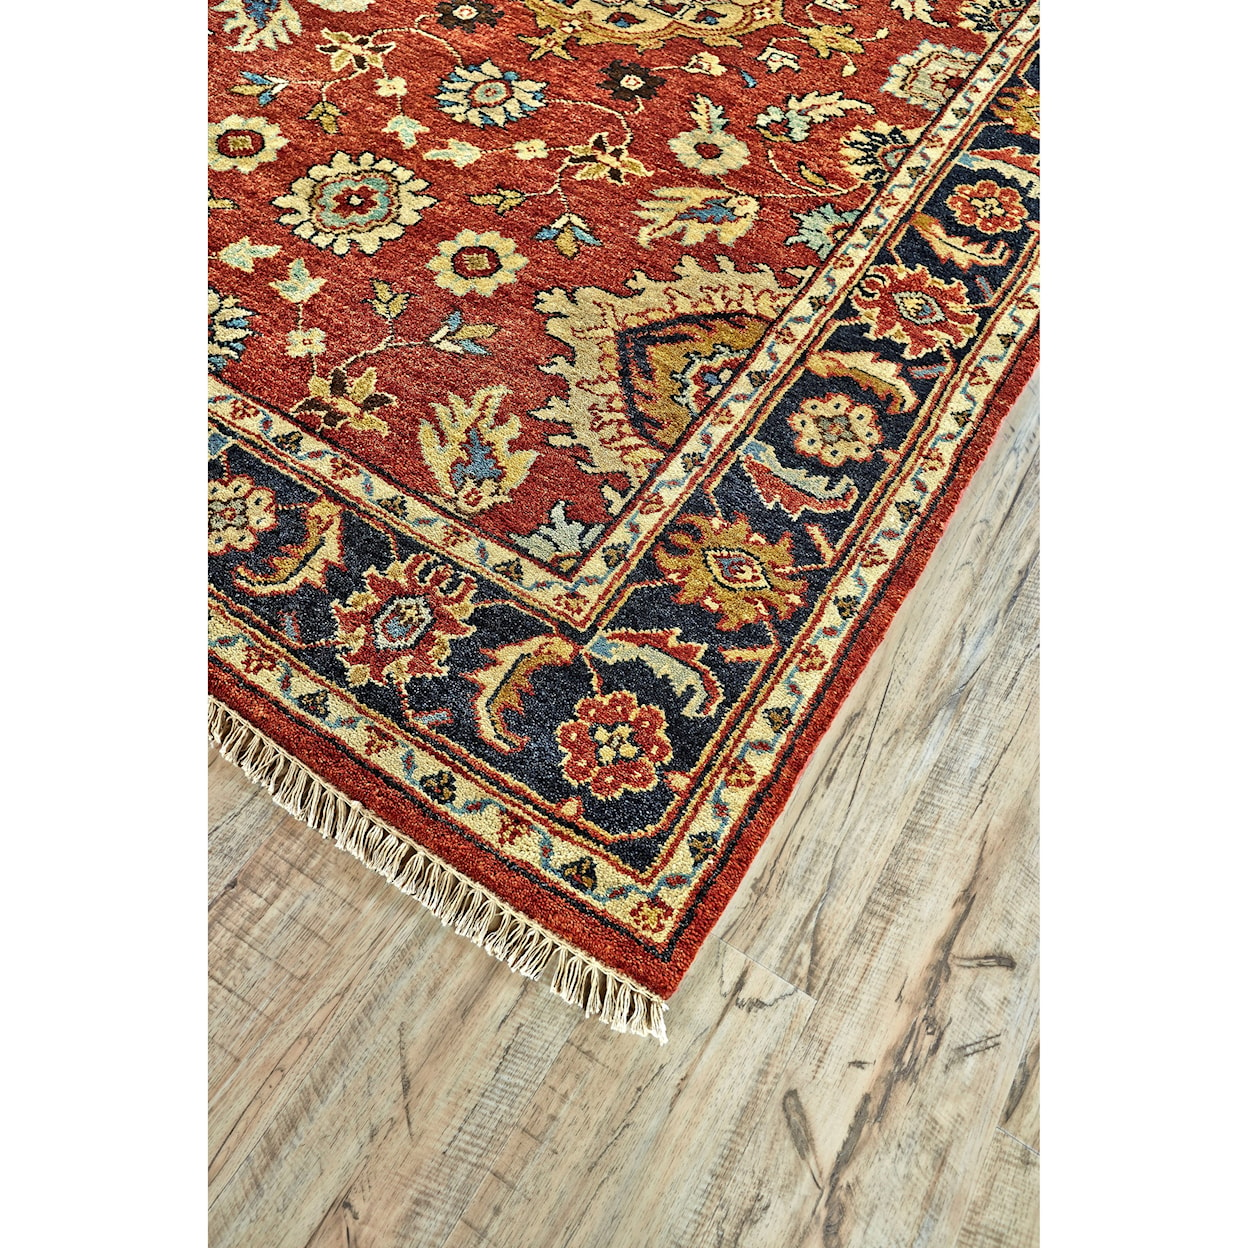 Feizy Rugs Ustad Red/Black 8'-6" x 11'-6" Area Rug